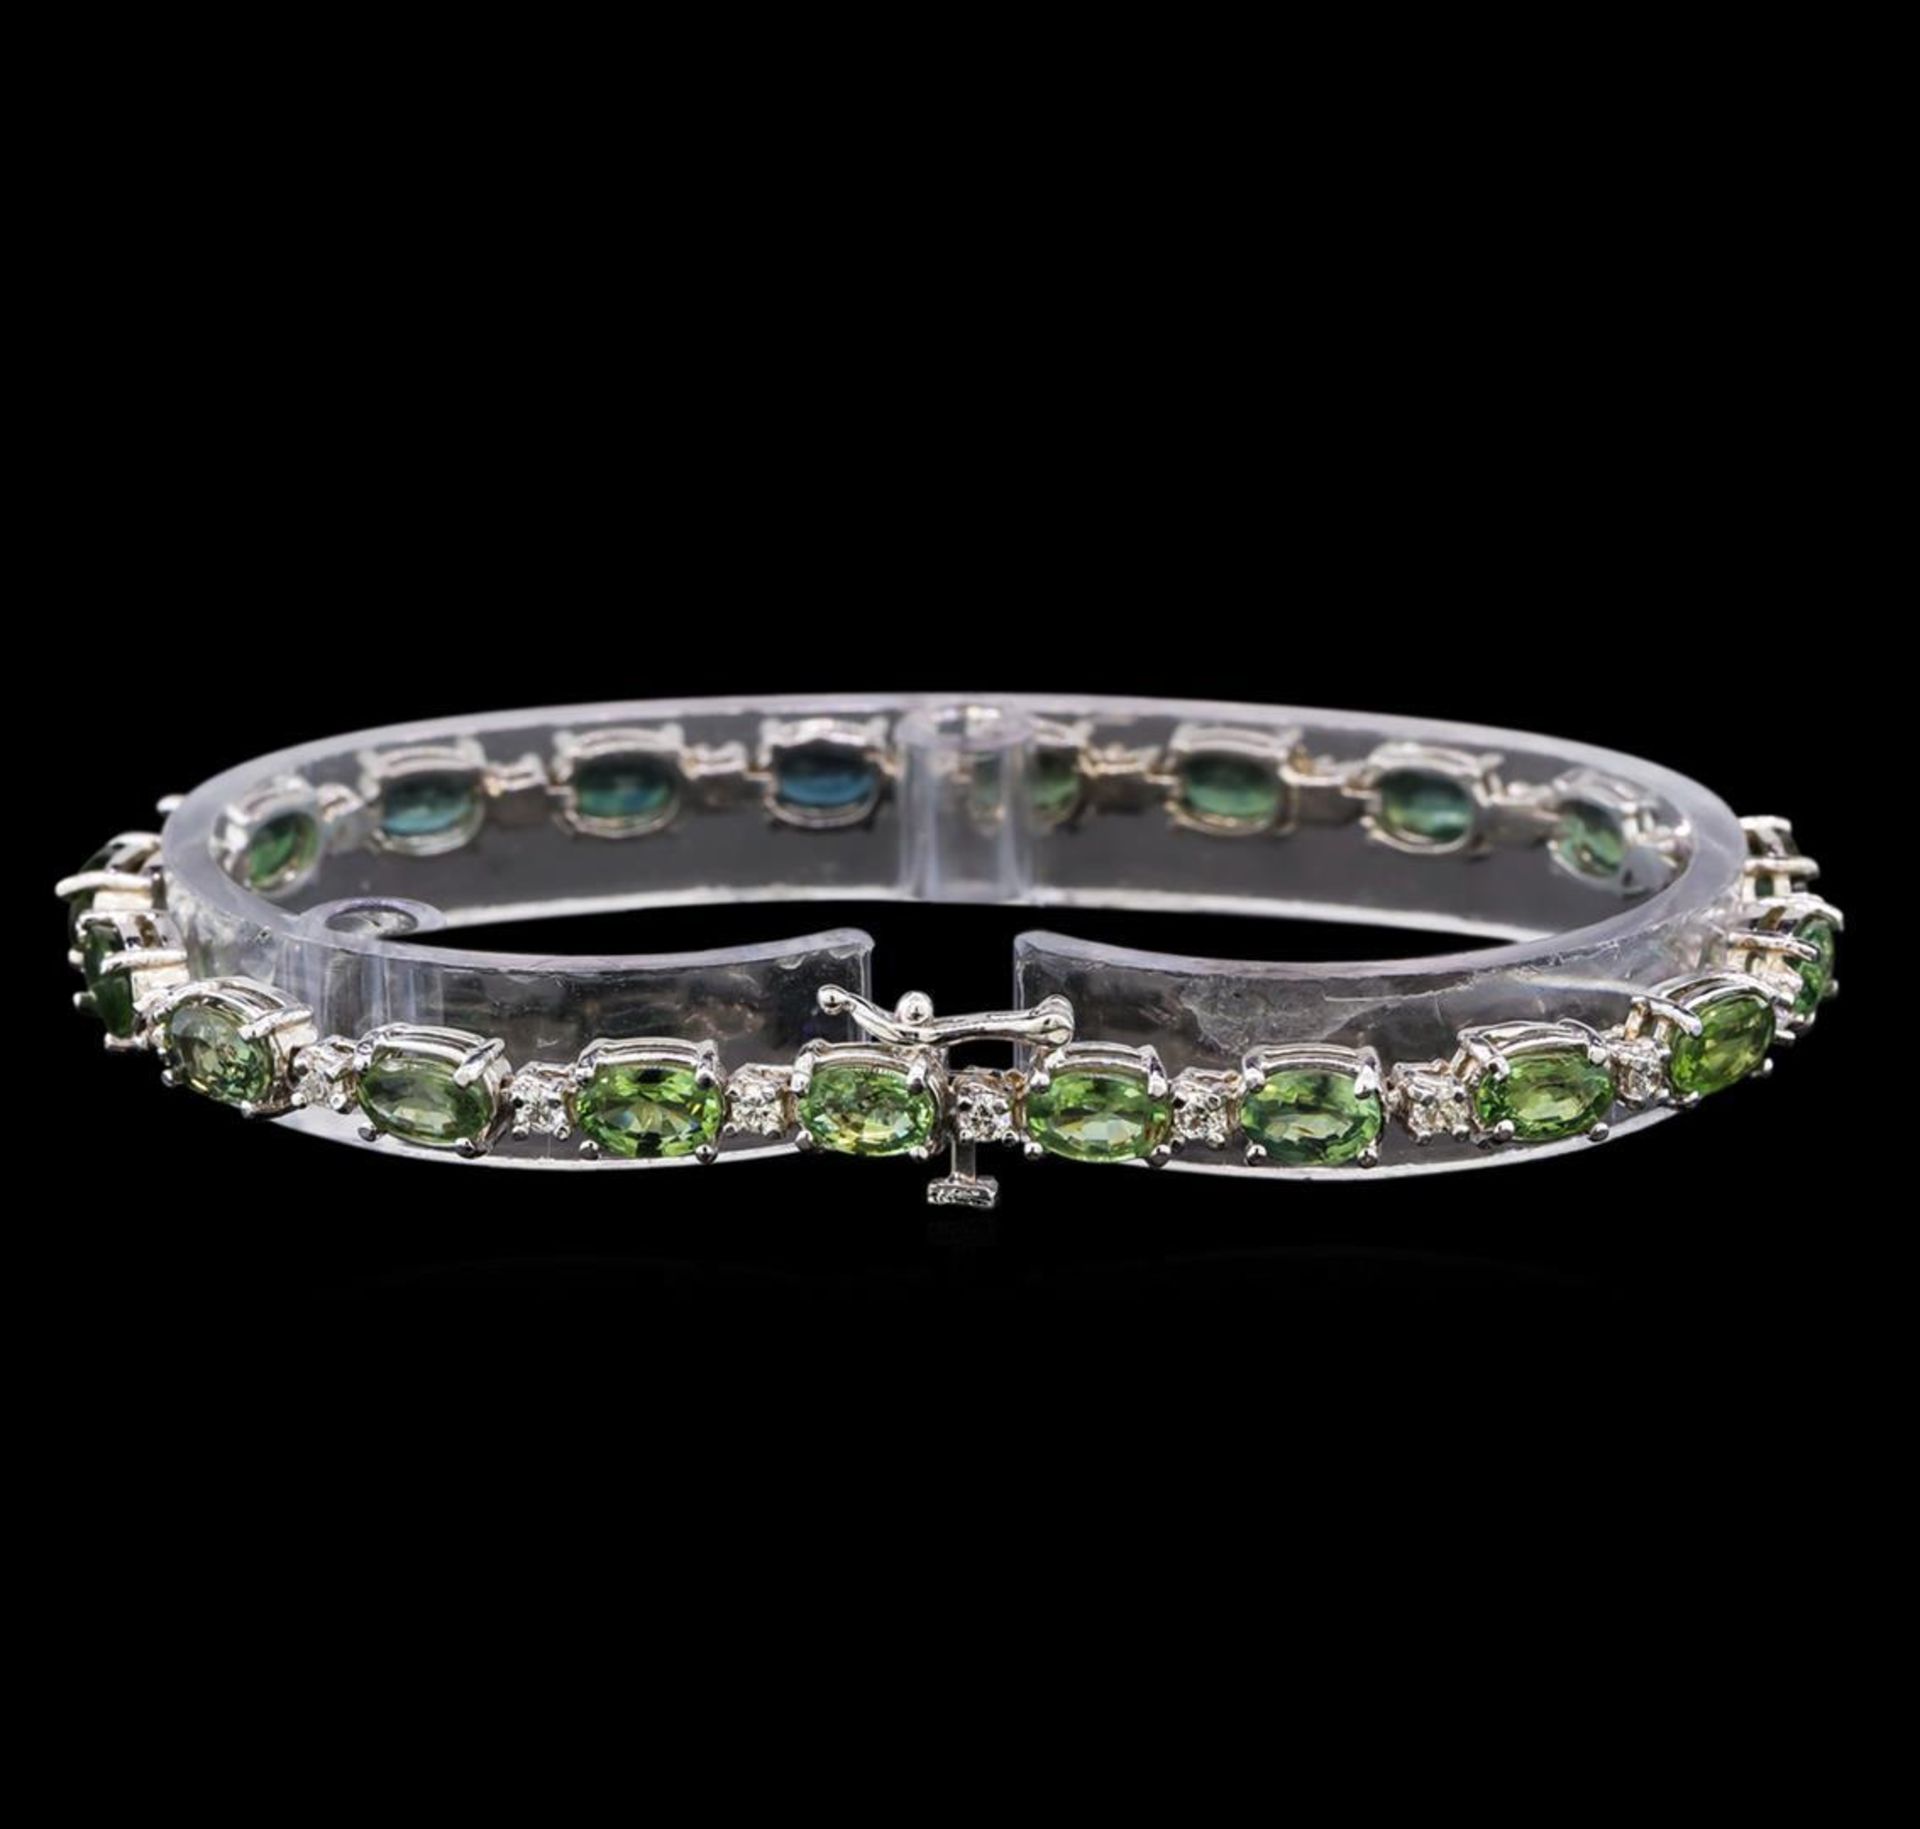 14KT White Gold 11.20 ctw Green Sapphire and Diamond Bracelet - Image 2 of 4